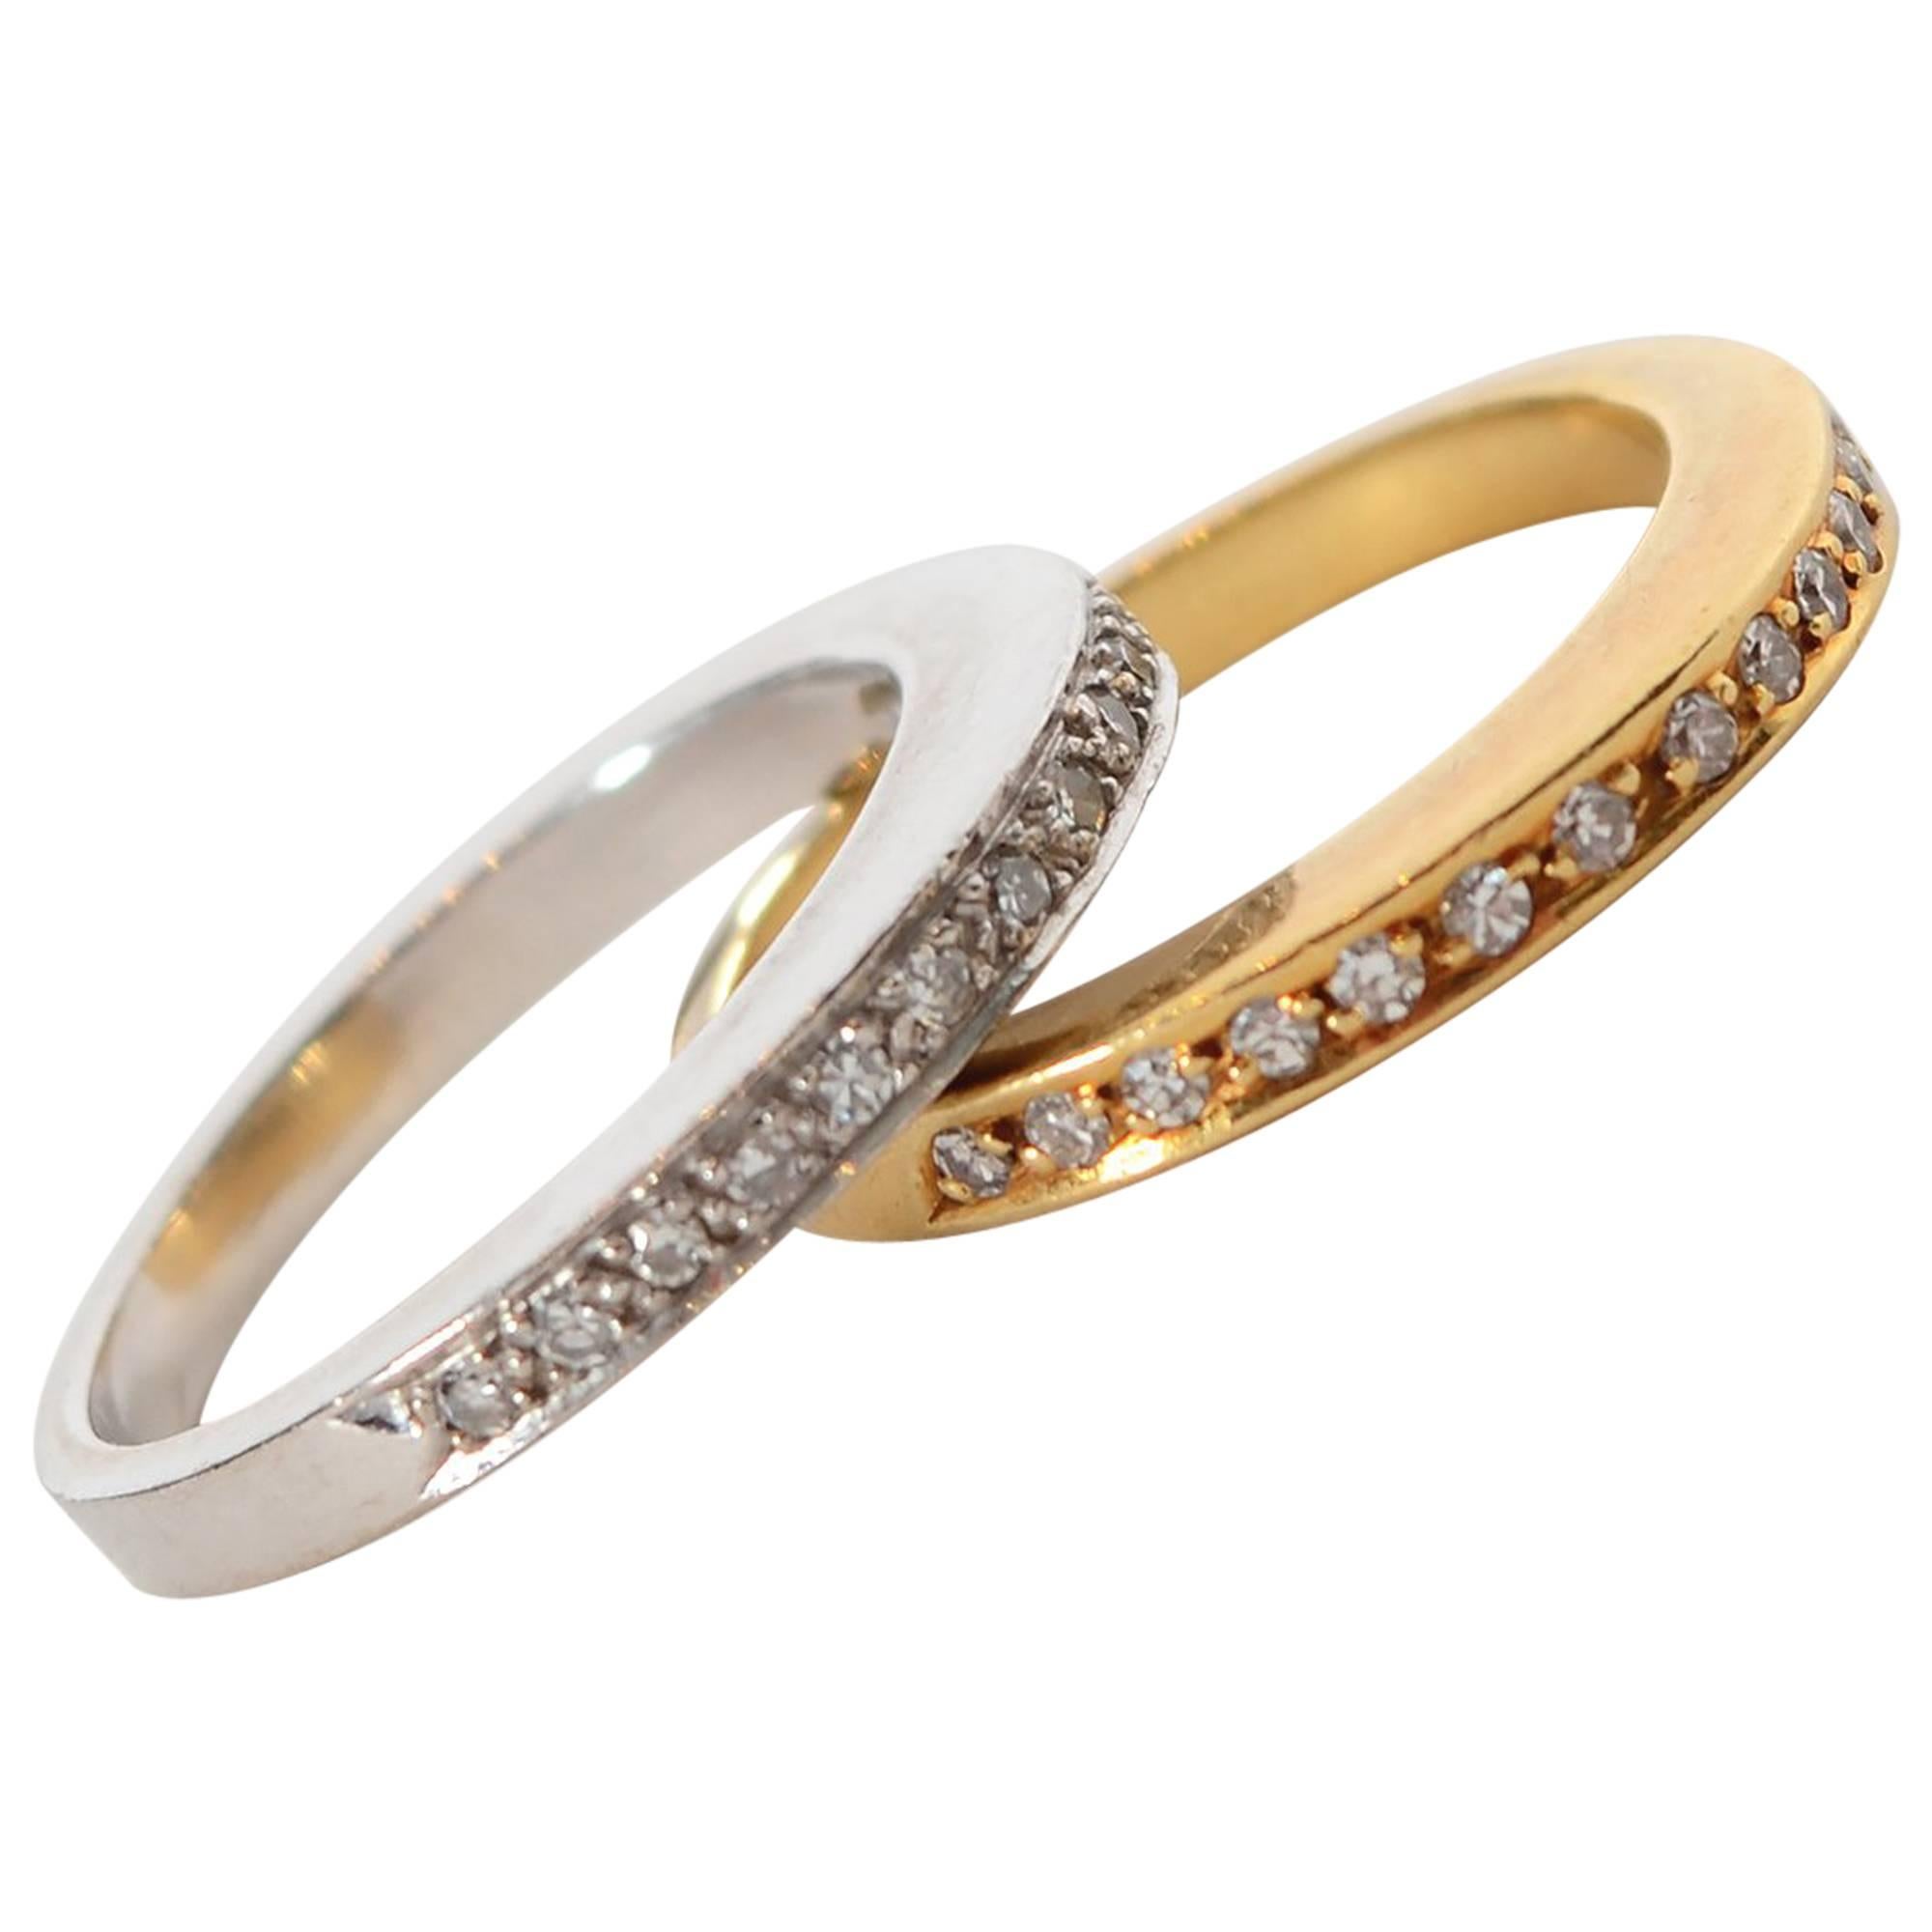 Victor M Pair of Gold Band Diamond Rings